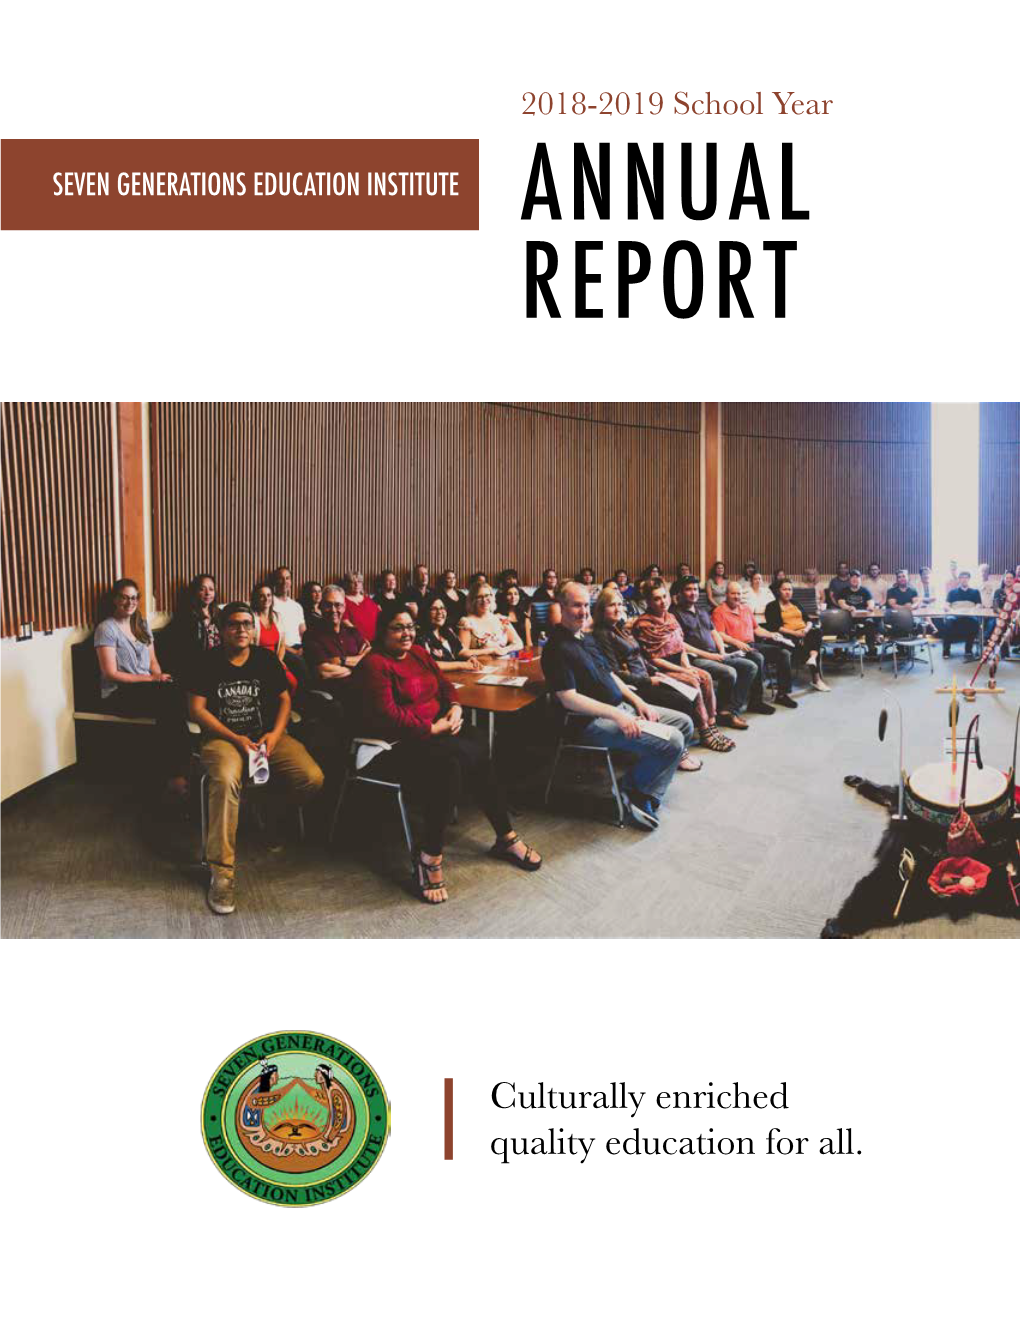 2018-2019 School Year SEVEN GENERATIONS EDUCATION INSTITUTE ANNUAL REPORT